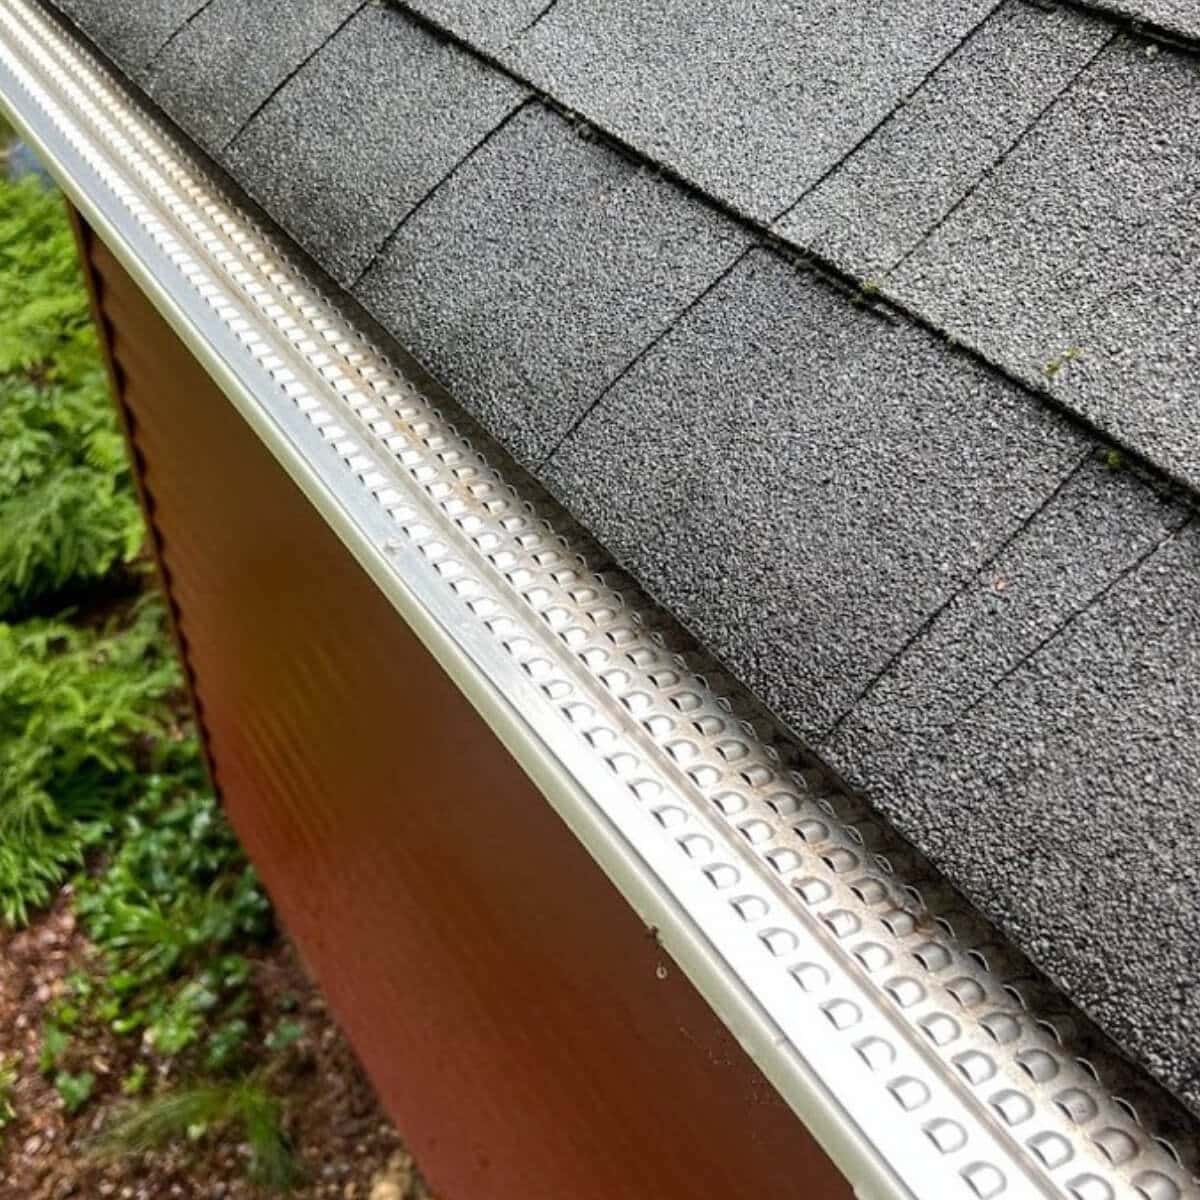 clean house gutter after pro gutter cleaning service in lansdale pa